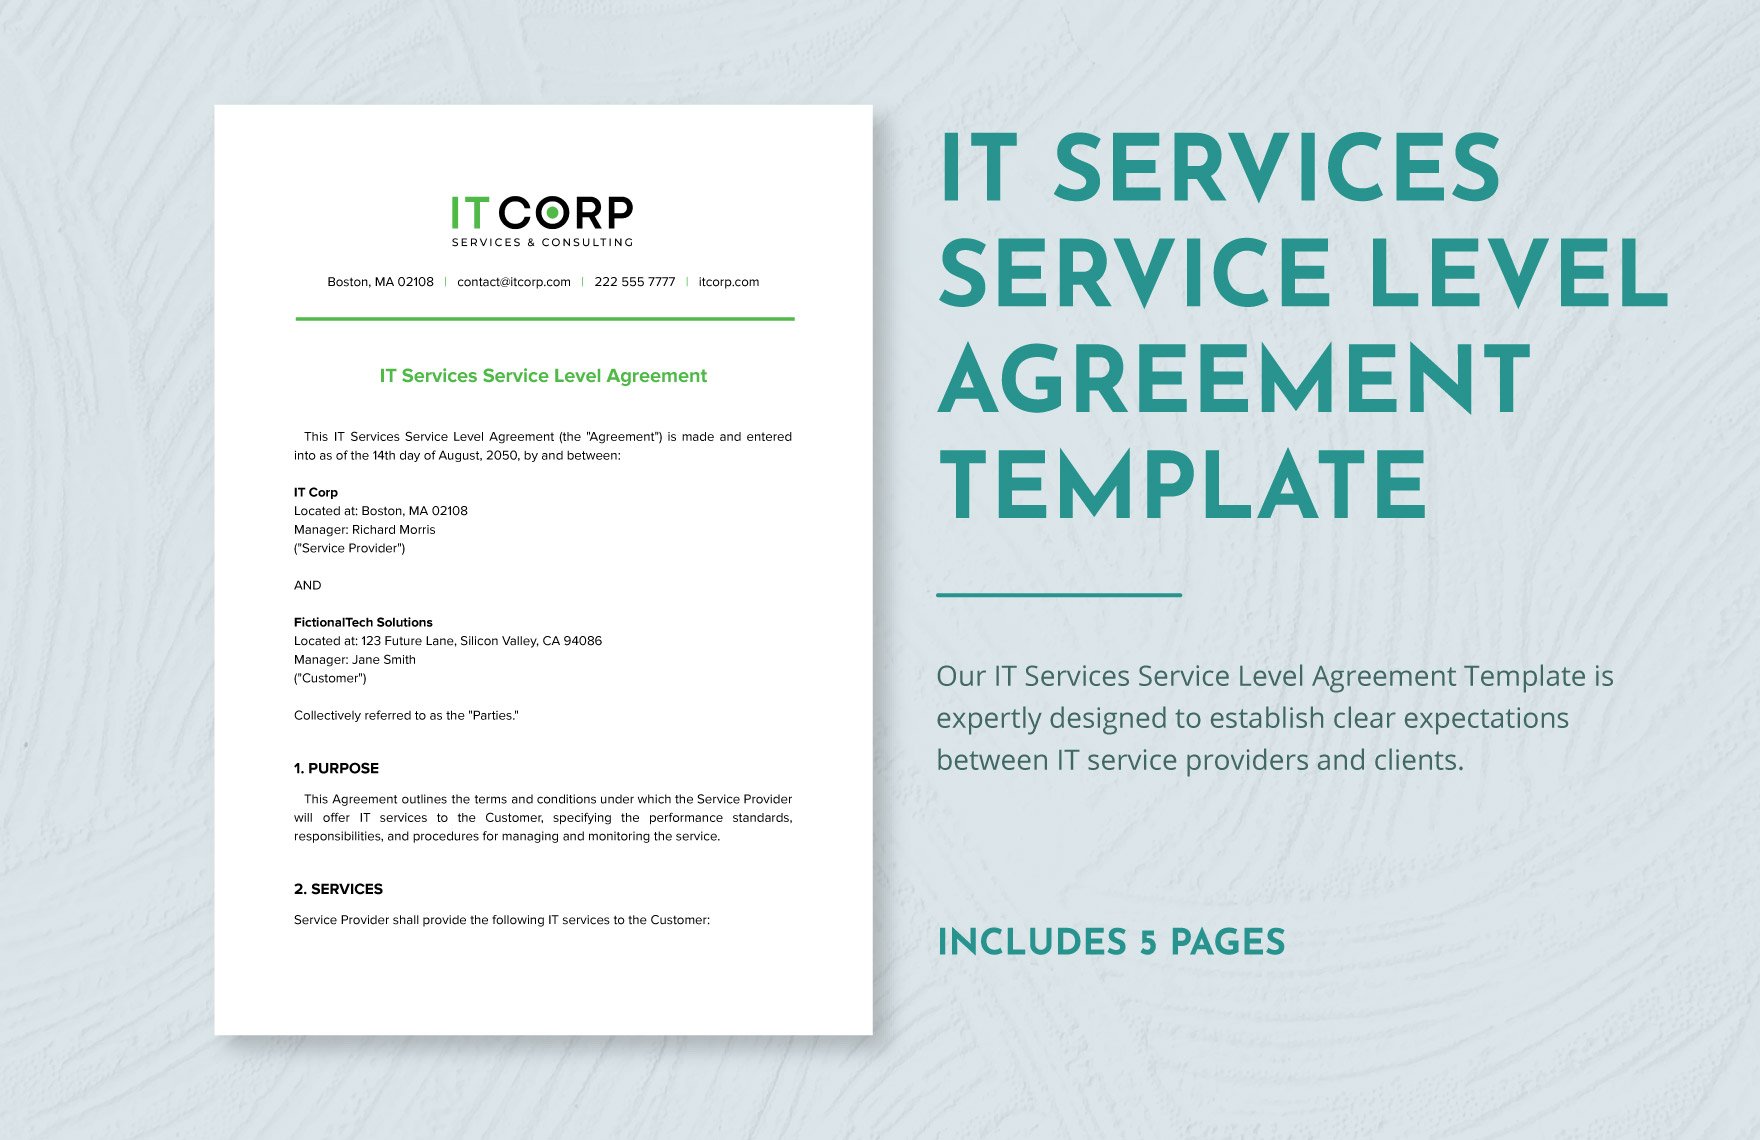 IT Services Service Level Agreement Template